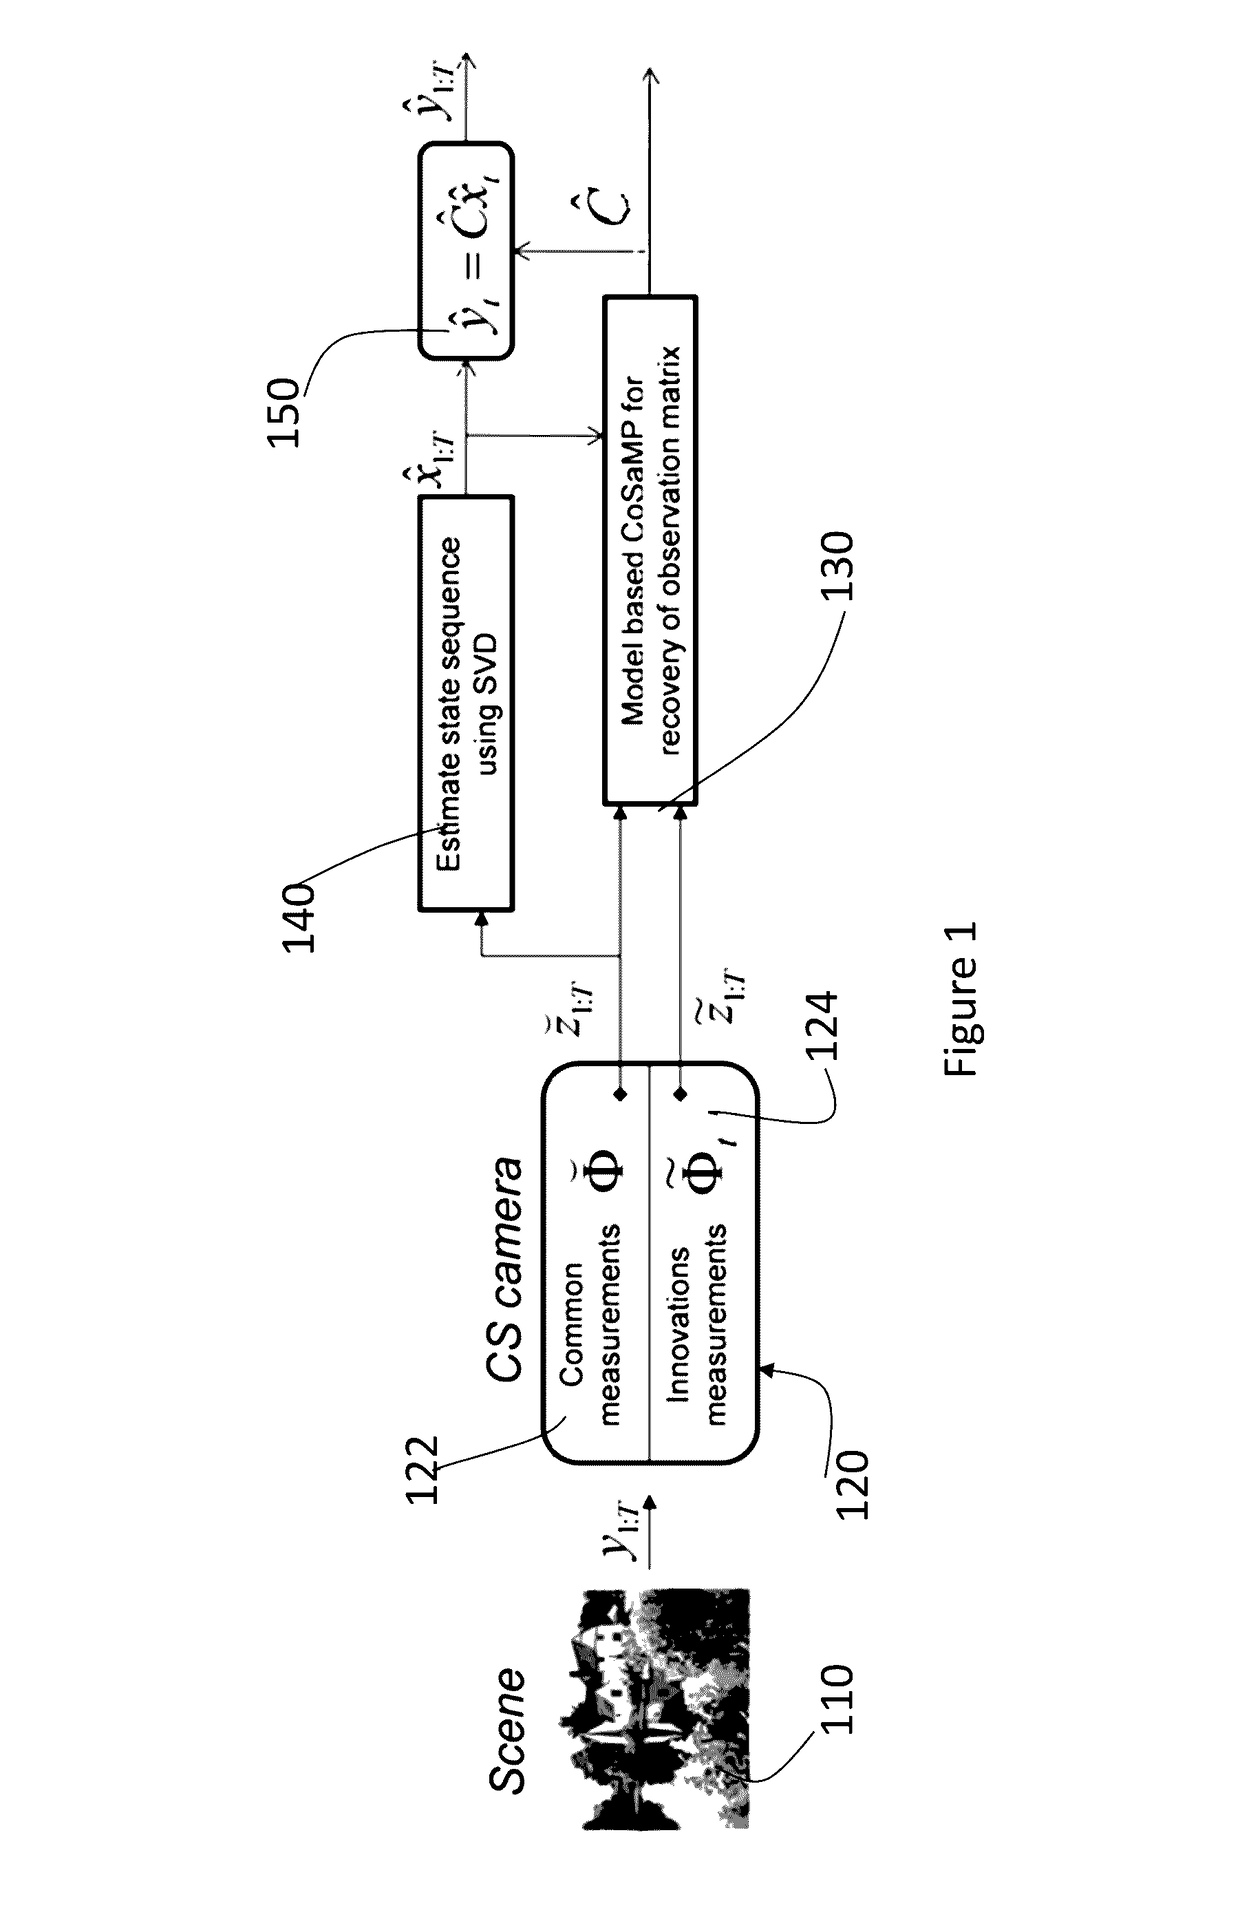 Method and apparatus for compressive acquisition and recovery of dynamic imagery